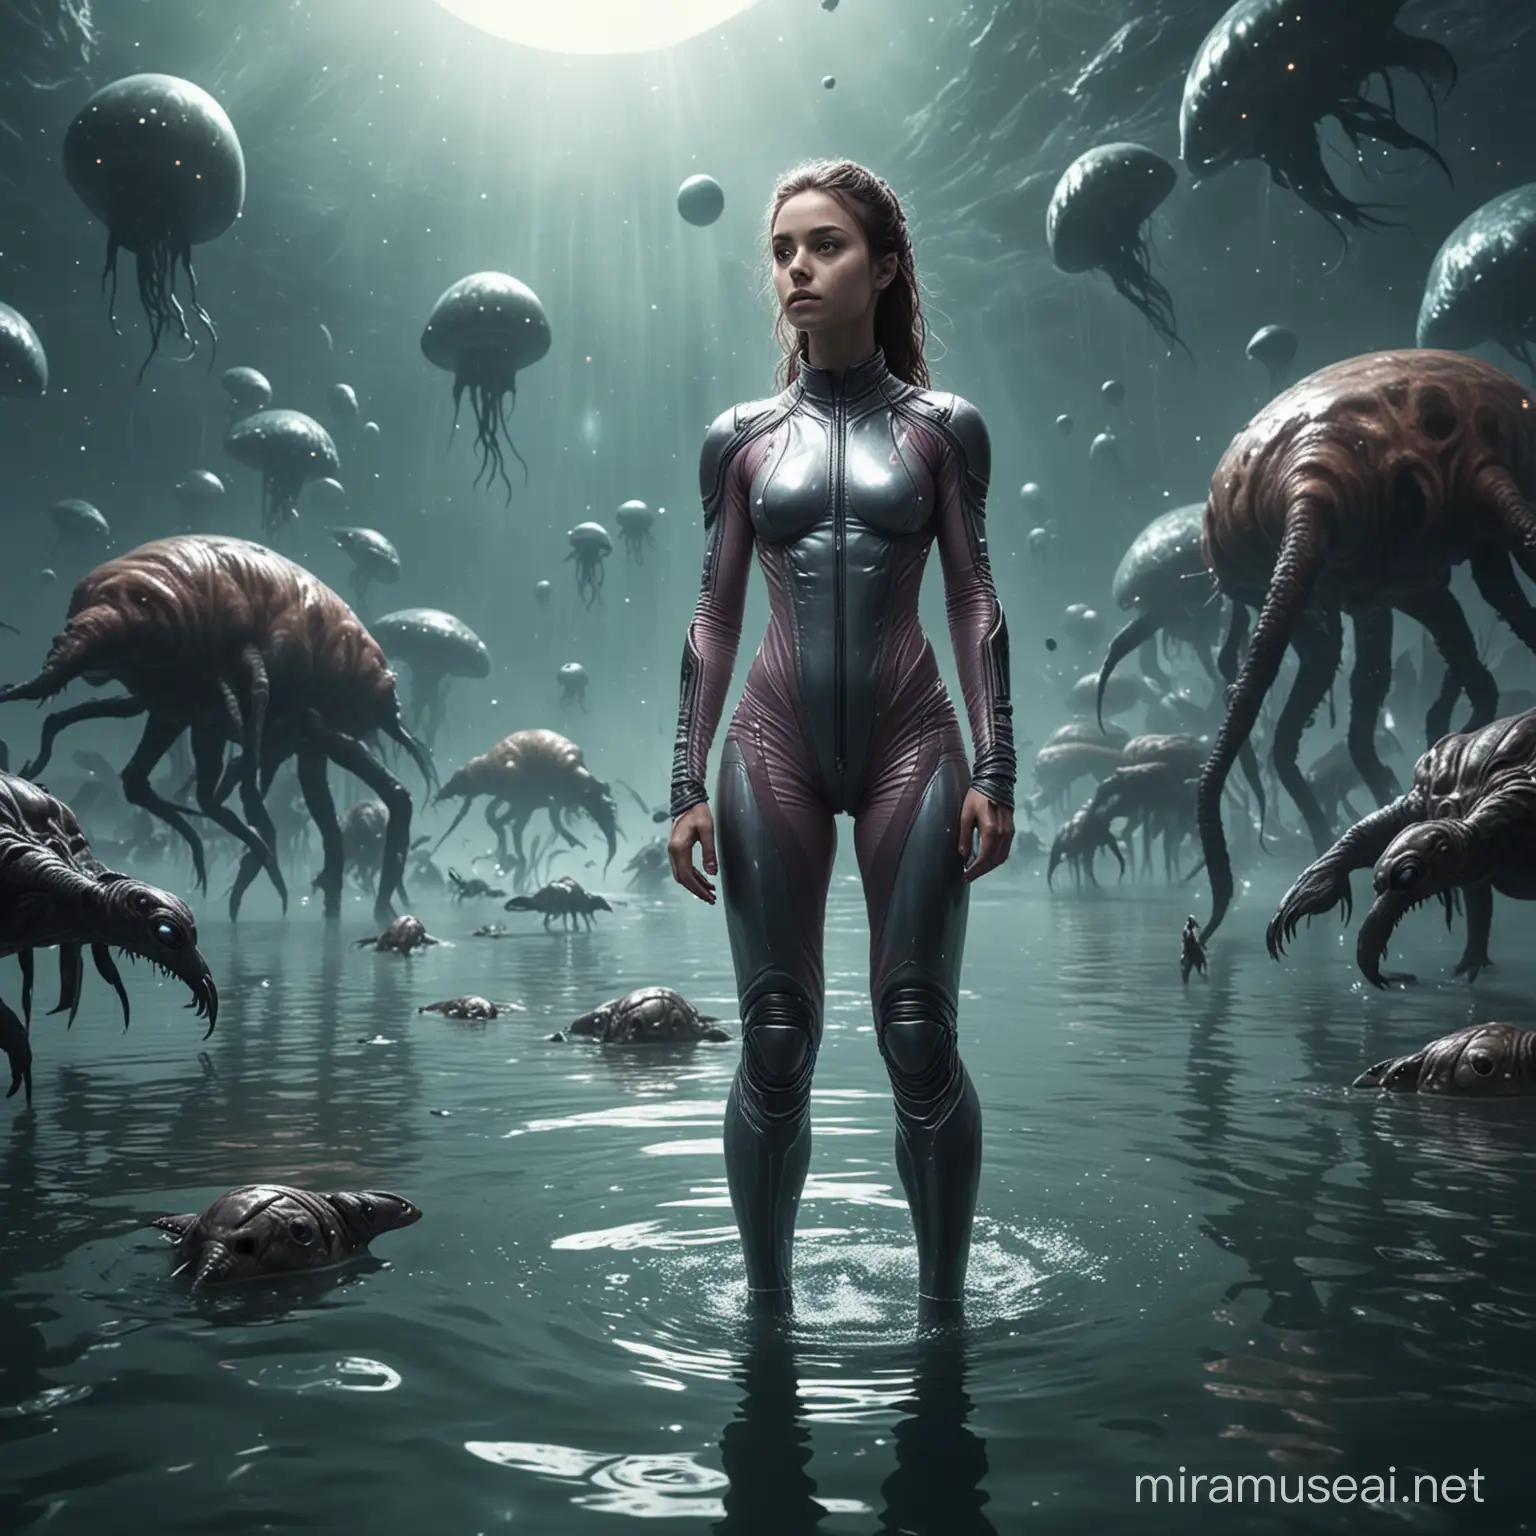 petite female in tight space clothing on a strange planet, floating in water, alien animals stir about, full body